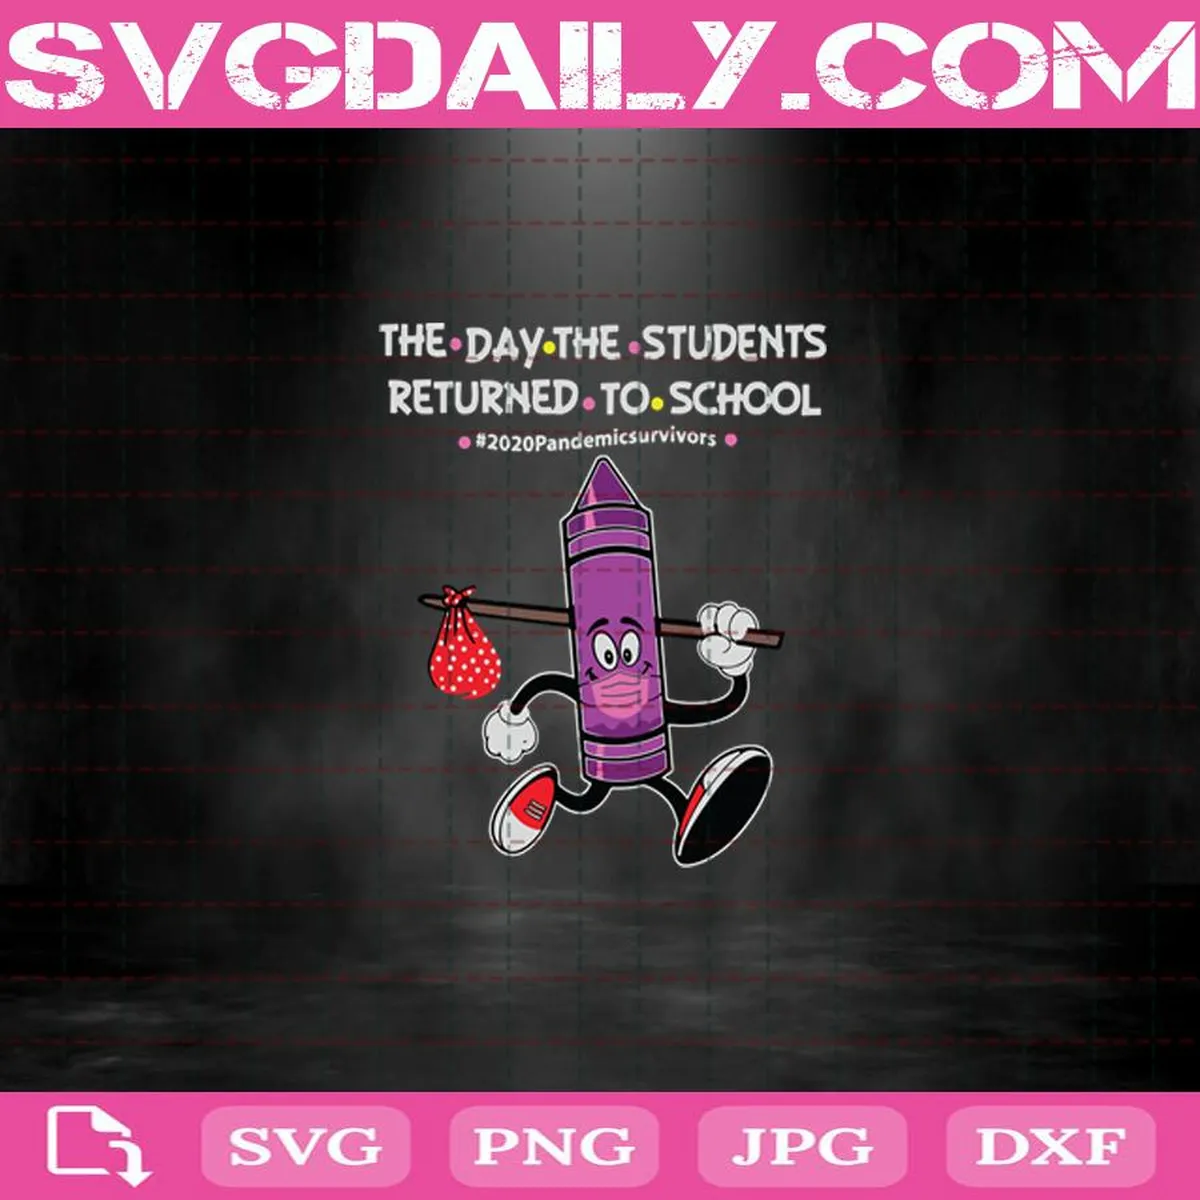 Purple Crayon The Day The Teachers Returned To School Svg, 2020 Pandemic Survivors Svg, Back To School Svg